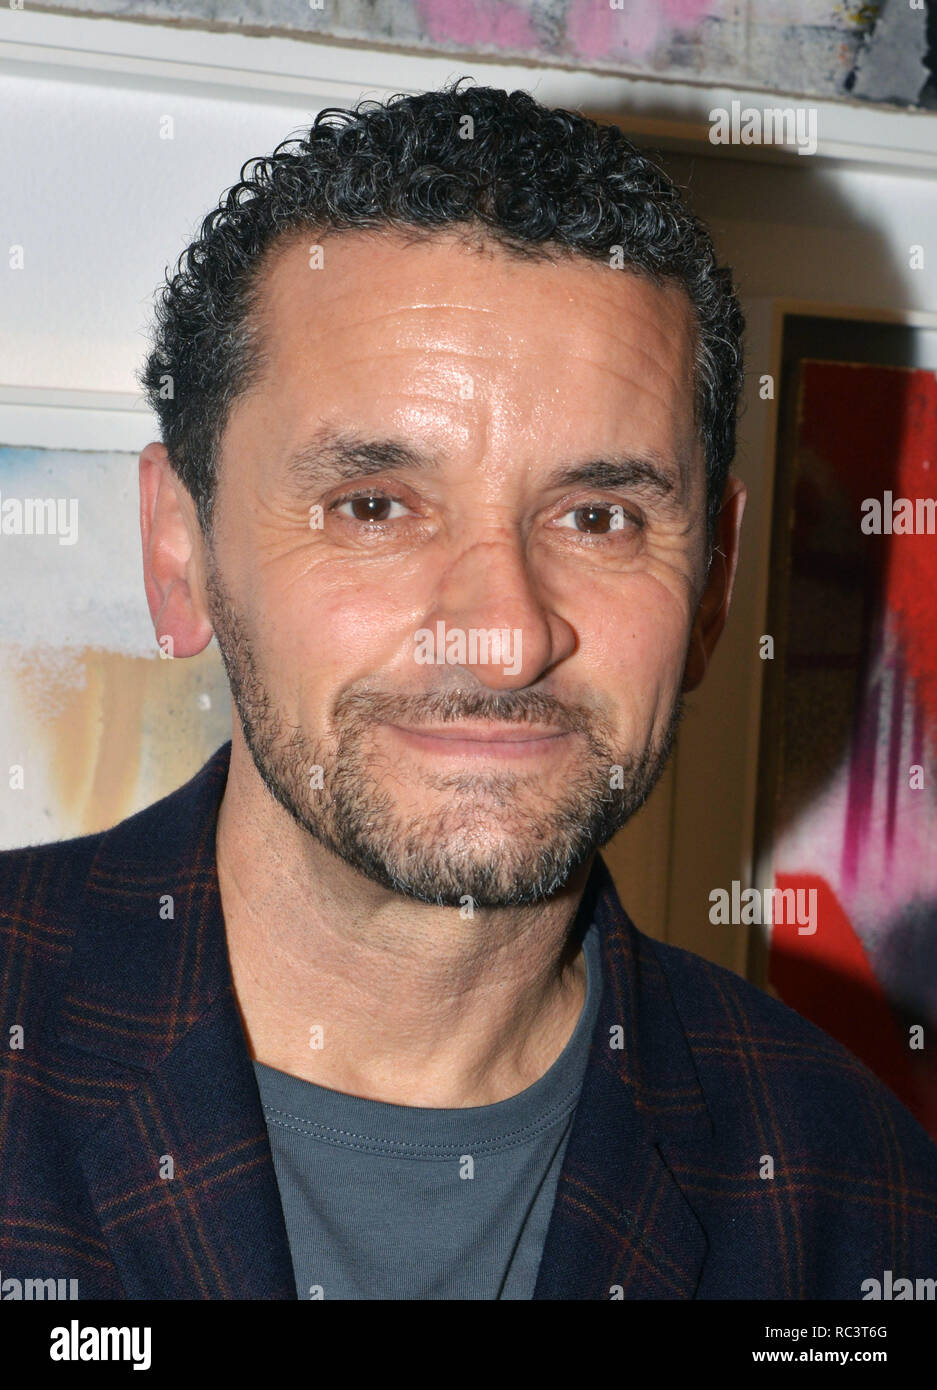 Los Angeles, Ca, USA. 12th Jan, 2019. Lee Quinones at 'If These Walls Could Talk' exhibition at the Charlie James Gallery in Los Angeles, California on January 12, 2019. Credit: Koi Sojer/Snap'n U Photos/Media Punch/Alamy Live News Stock Photo